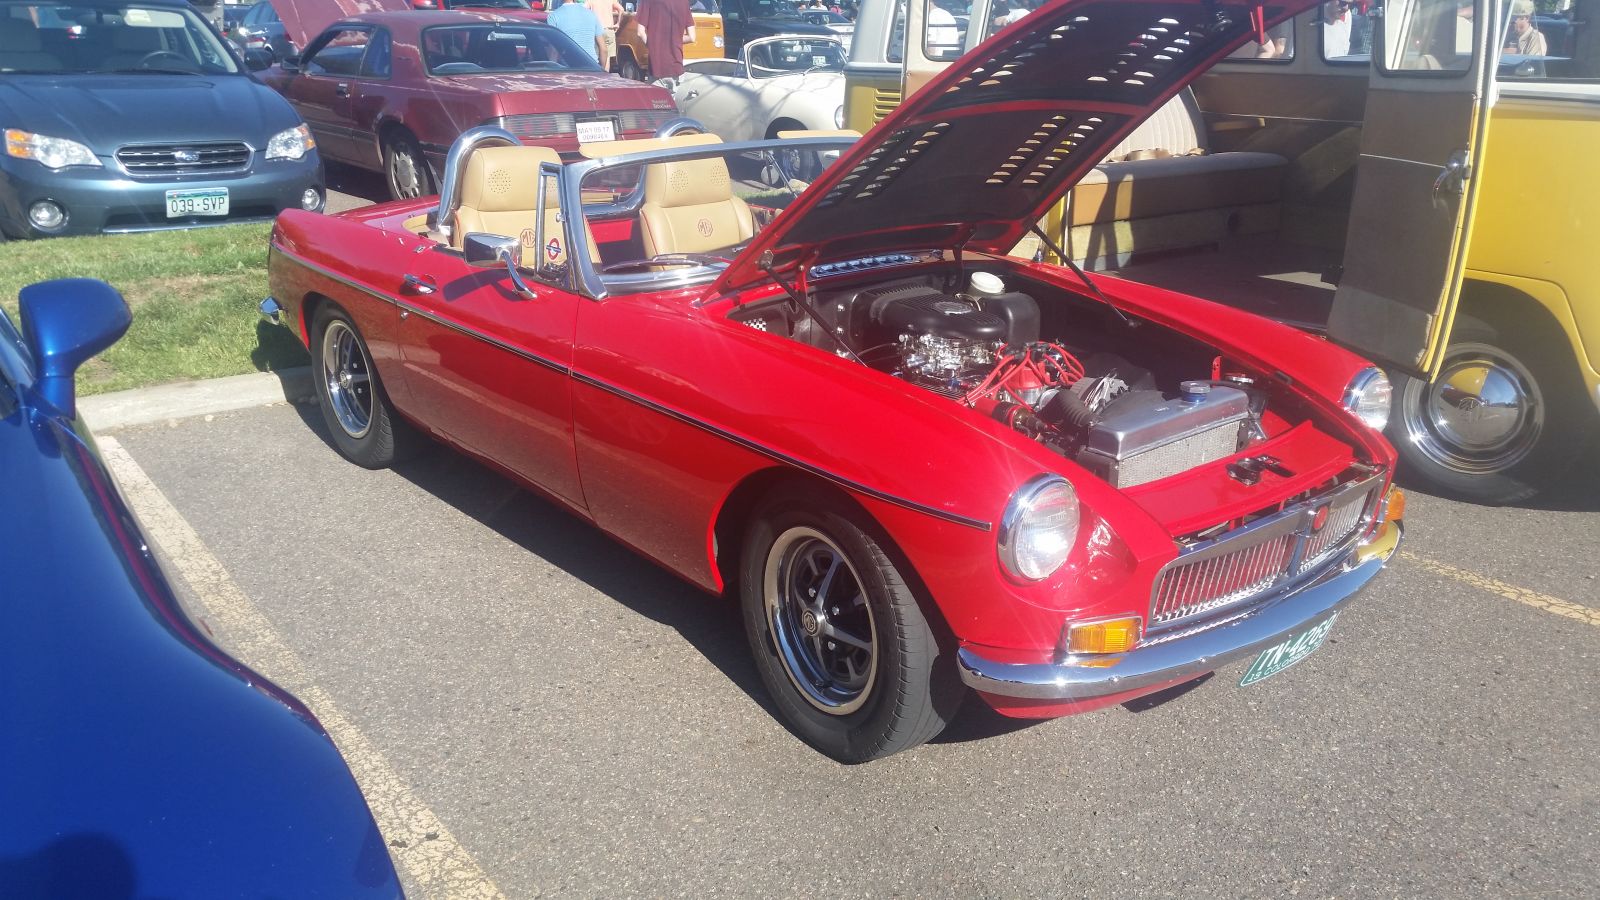 The reason this MG made it is because it is Ford powered.  The others are probably still on the side of the road.